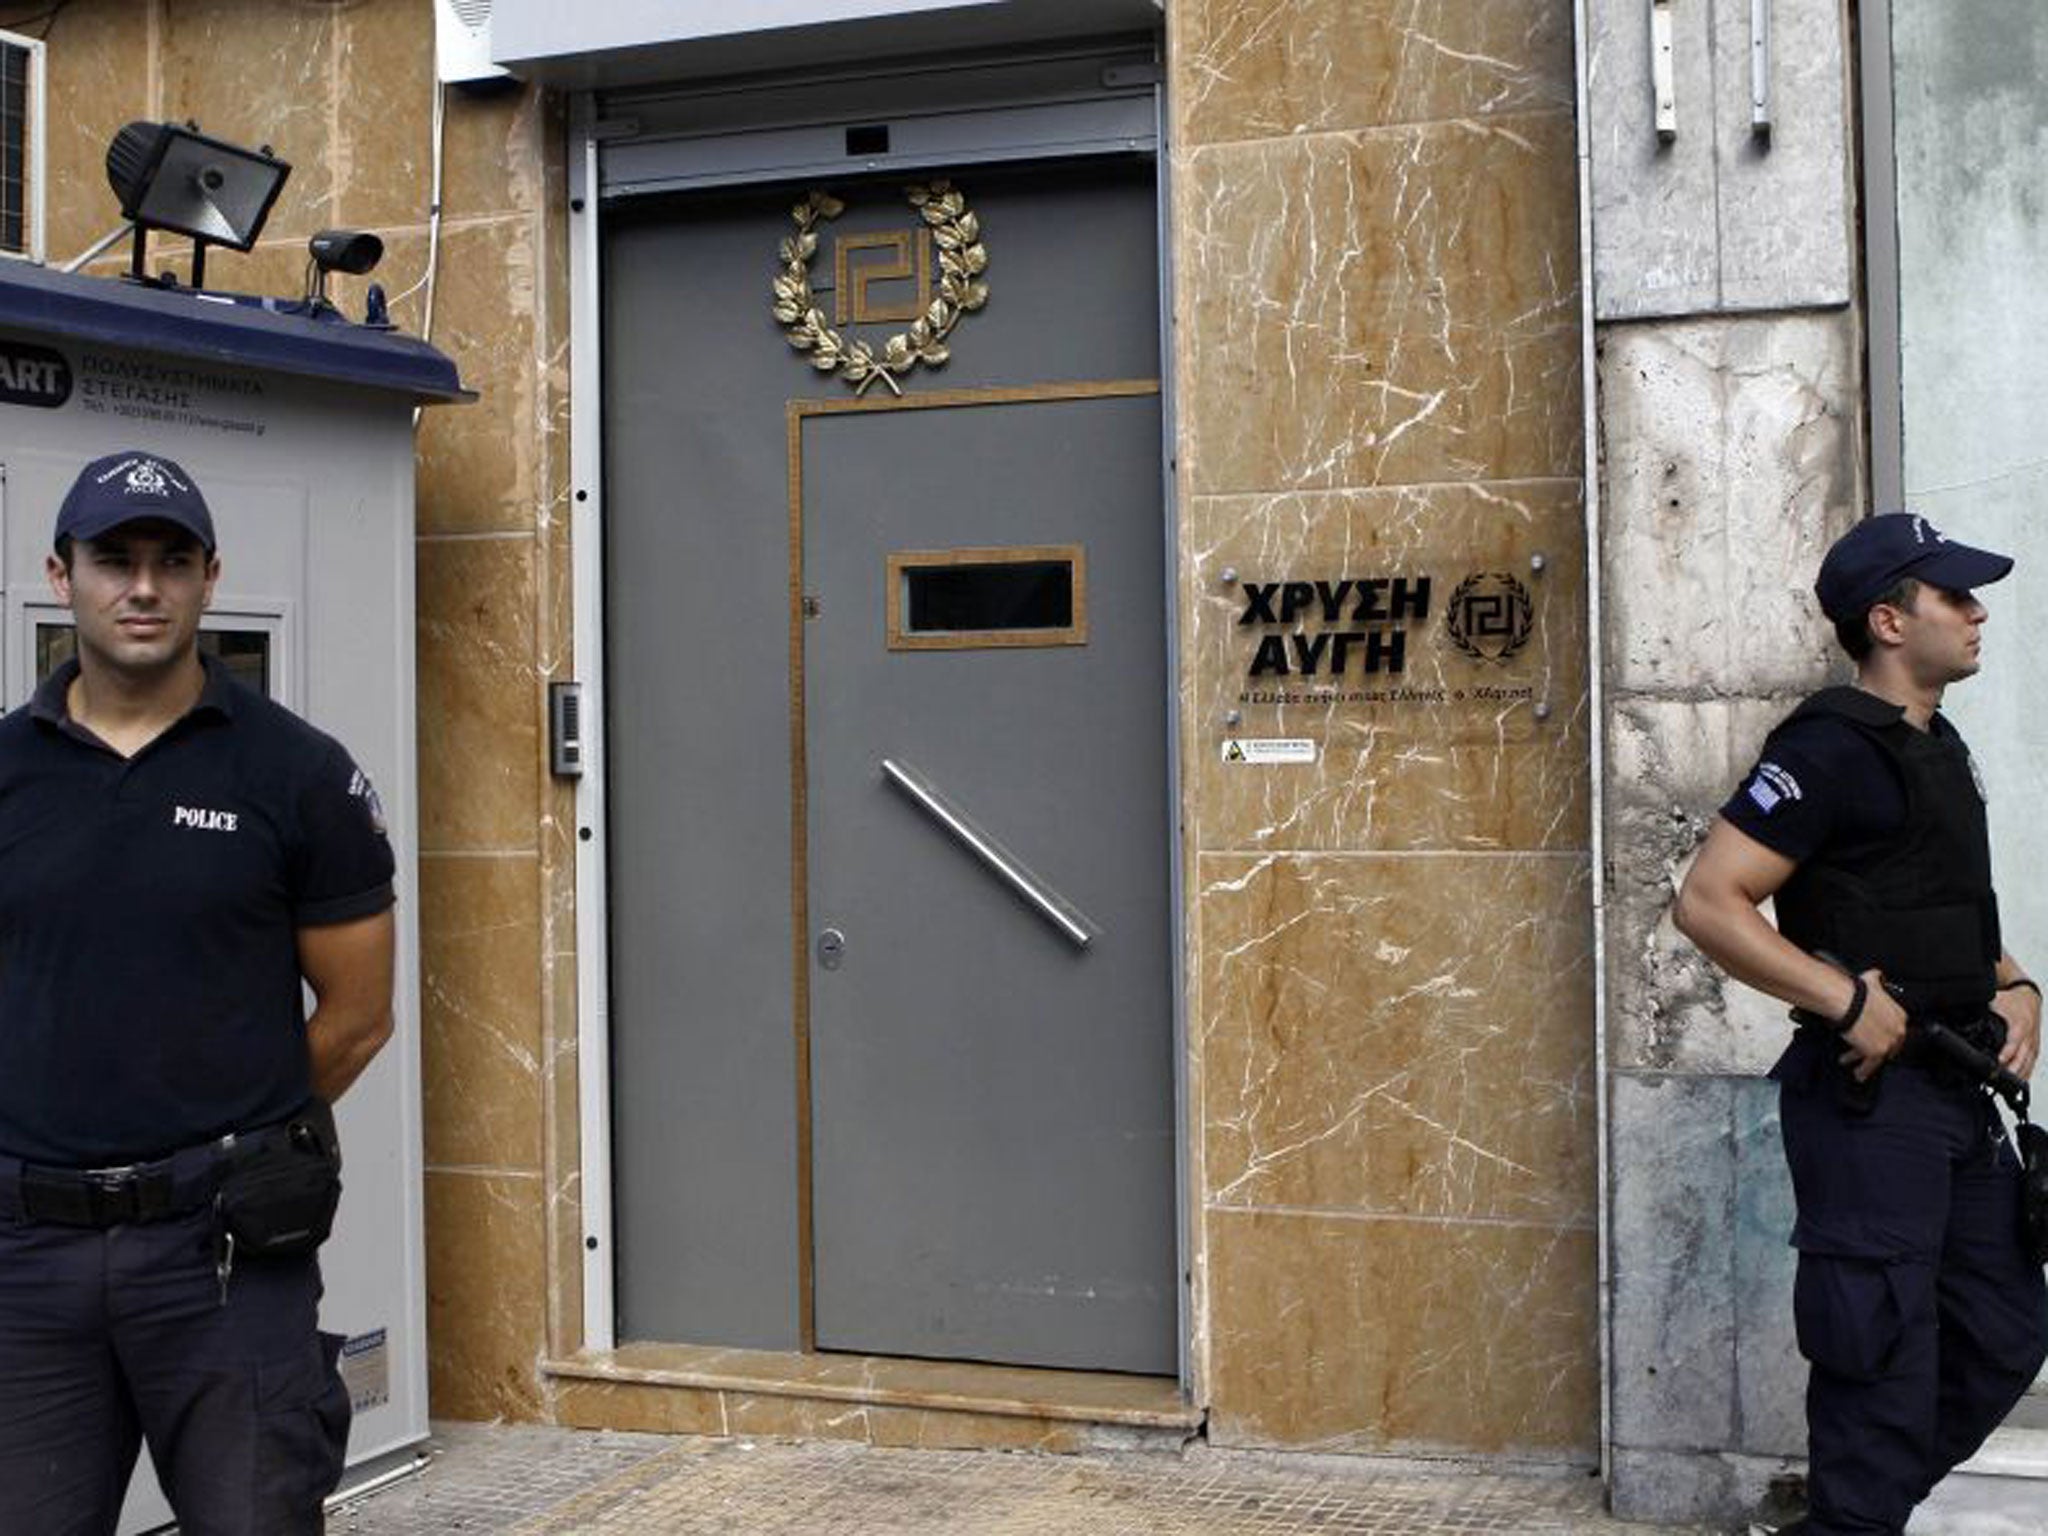 Police officers stand guard outside the headquarters of the Golden Dawn far-right party in Athens